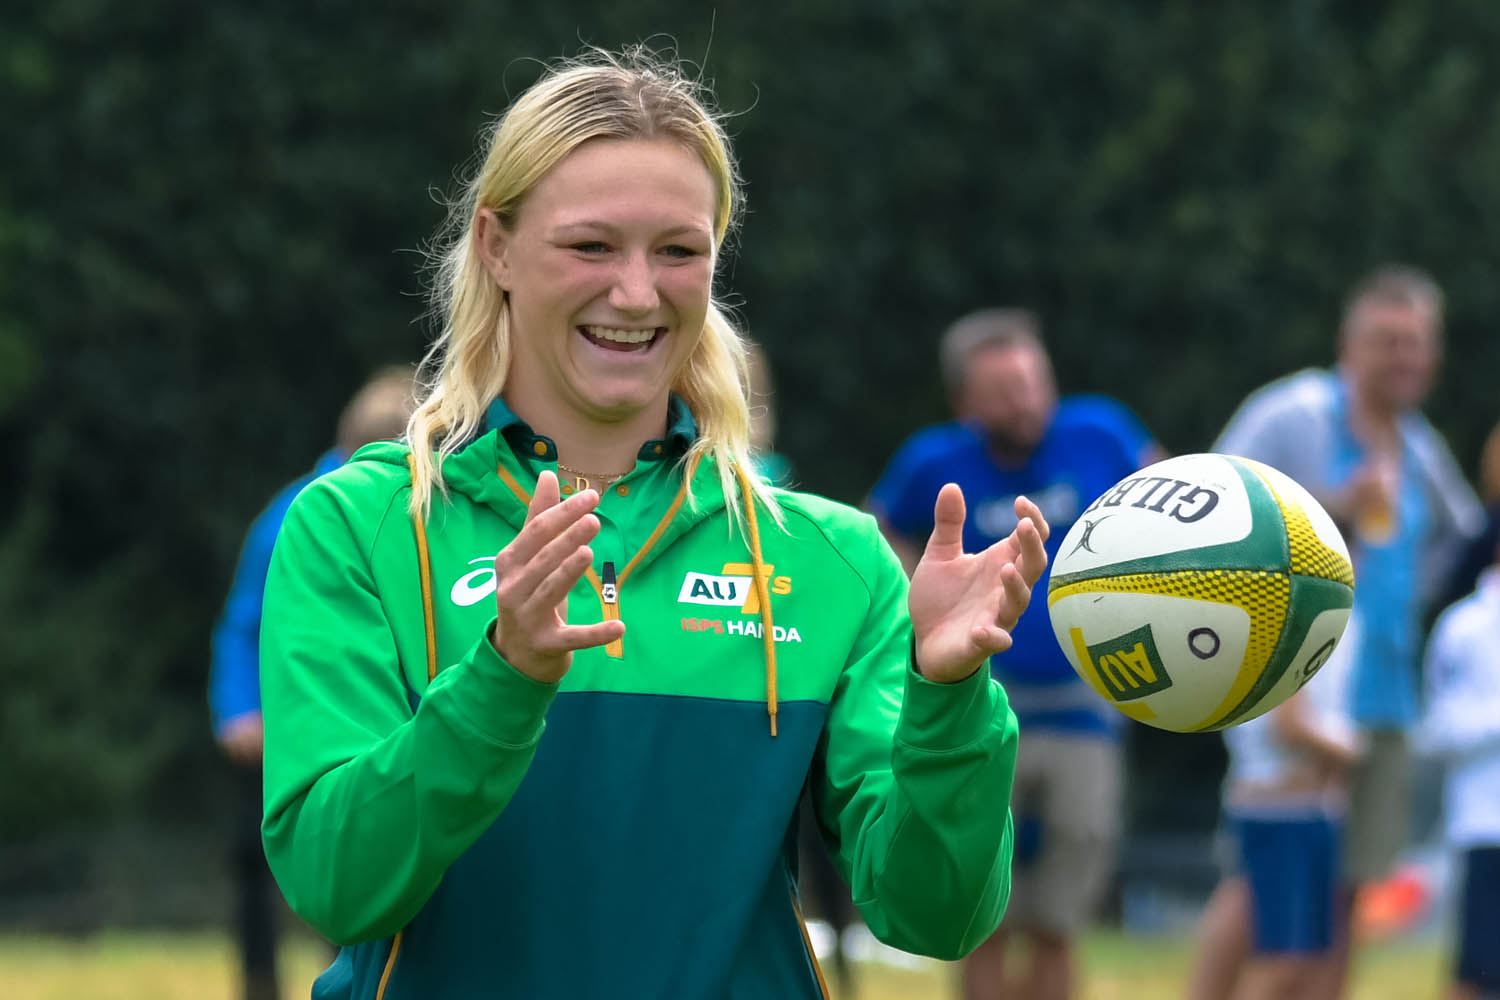 A woman smiles while catching a Rugby ball